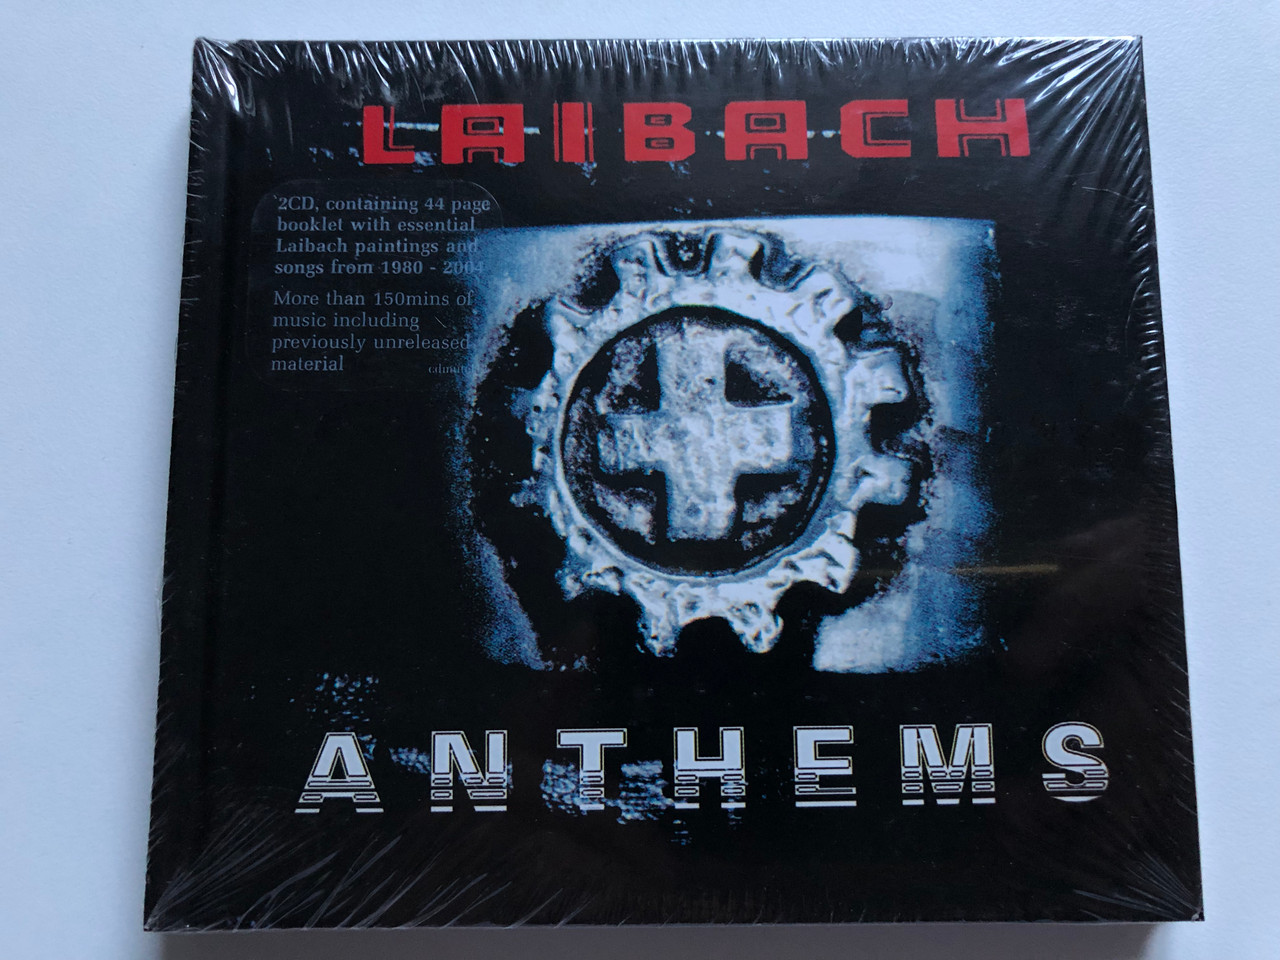 https://cdn10.bigcommerce.com/s-62bdpkt7pb/products/0/images/251074/Laibach_Anthems_2CD_containing_44_page_booklet_with_essential_Laibach_paintings_and_songs_from_1980-2004_More_than_150mins_of_music_including_previously_unreleased_material_Mute_2x_Audi_1__31960.1661334883.1280.1280.JPG?c=2&_gl=1*17tzp61*_ga*MjA2NTIxMjE2MC4xNTkwNTEyNTMy*_ga_WS2VZYPC6G*MTY2MTMxOTg5Ni41MzYuMS4xNjYxMzM0Njc2LjU3LjAuMA..